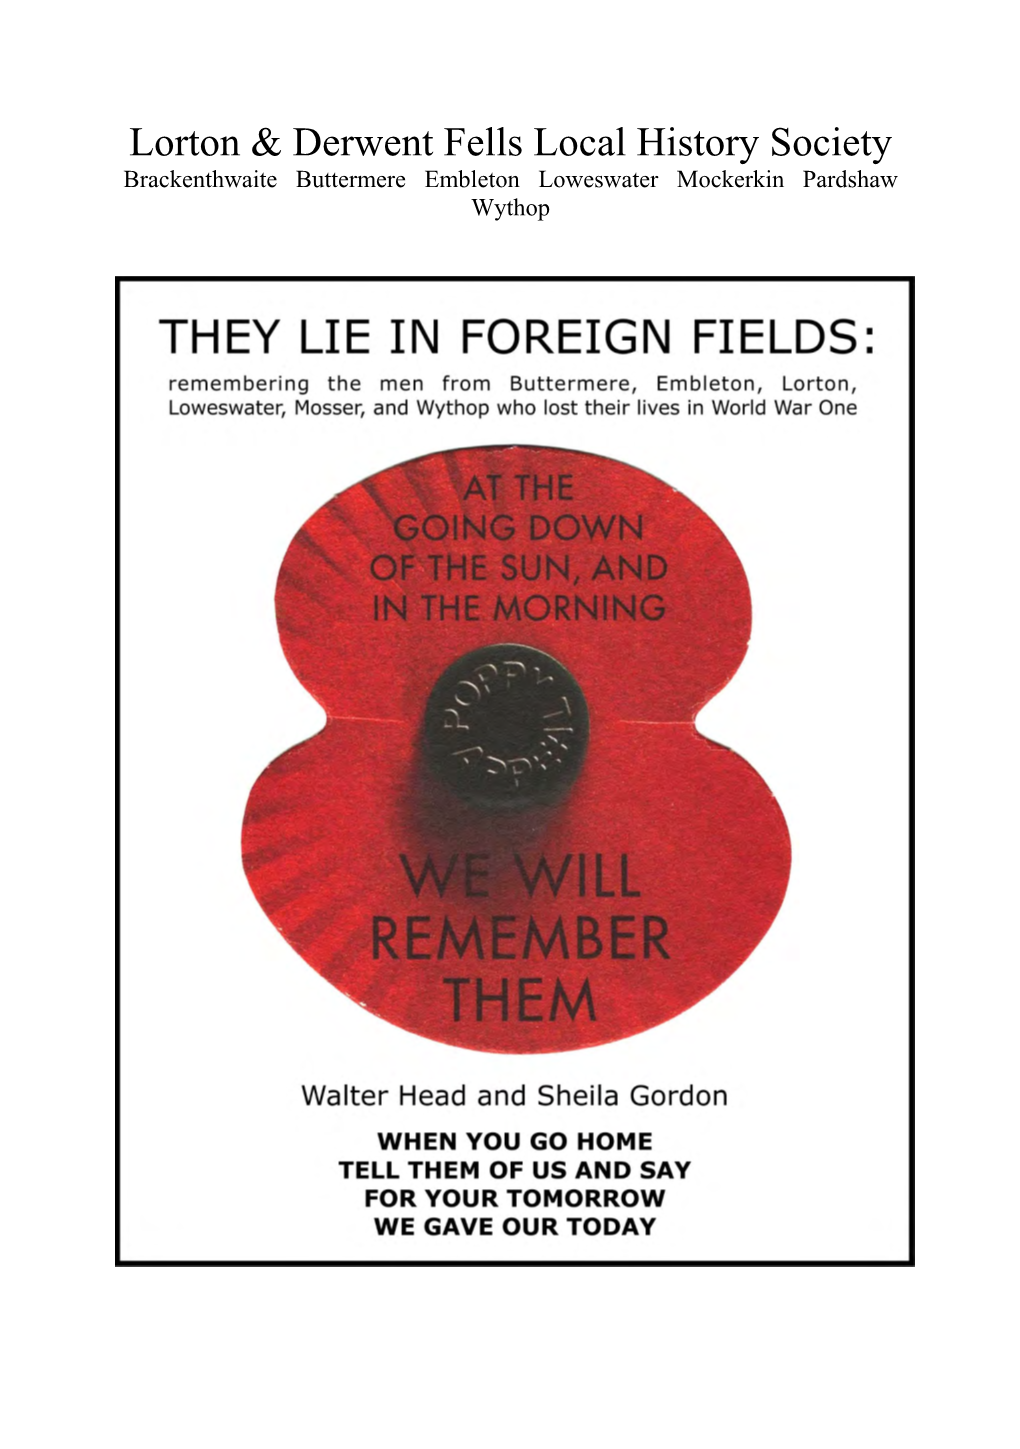 They Lie in Foreign Fields: Remembering the Men from Buttermere, Embleton, Lorton, Loweswater, Mosser and Wythop Who Lost Their Lives in World War One